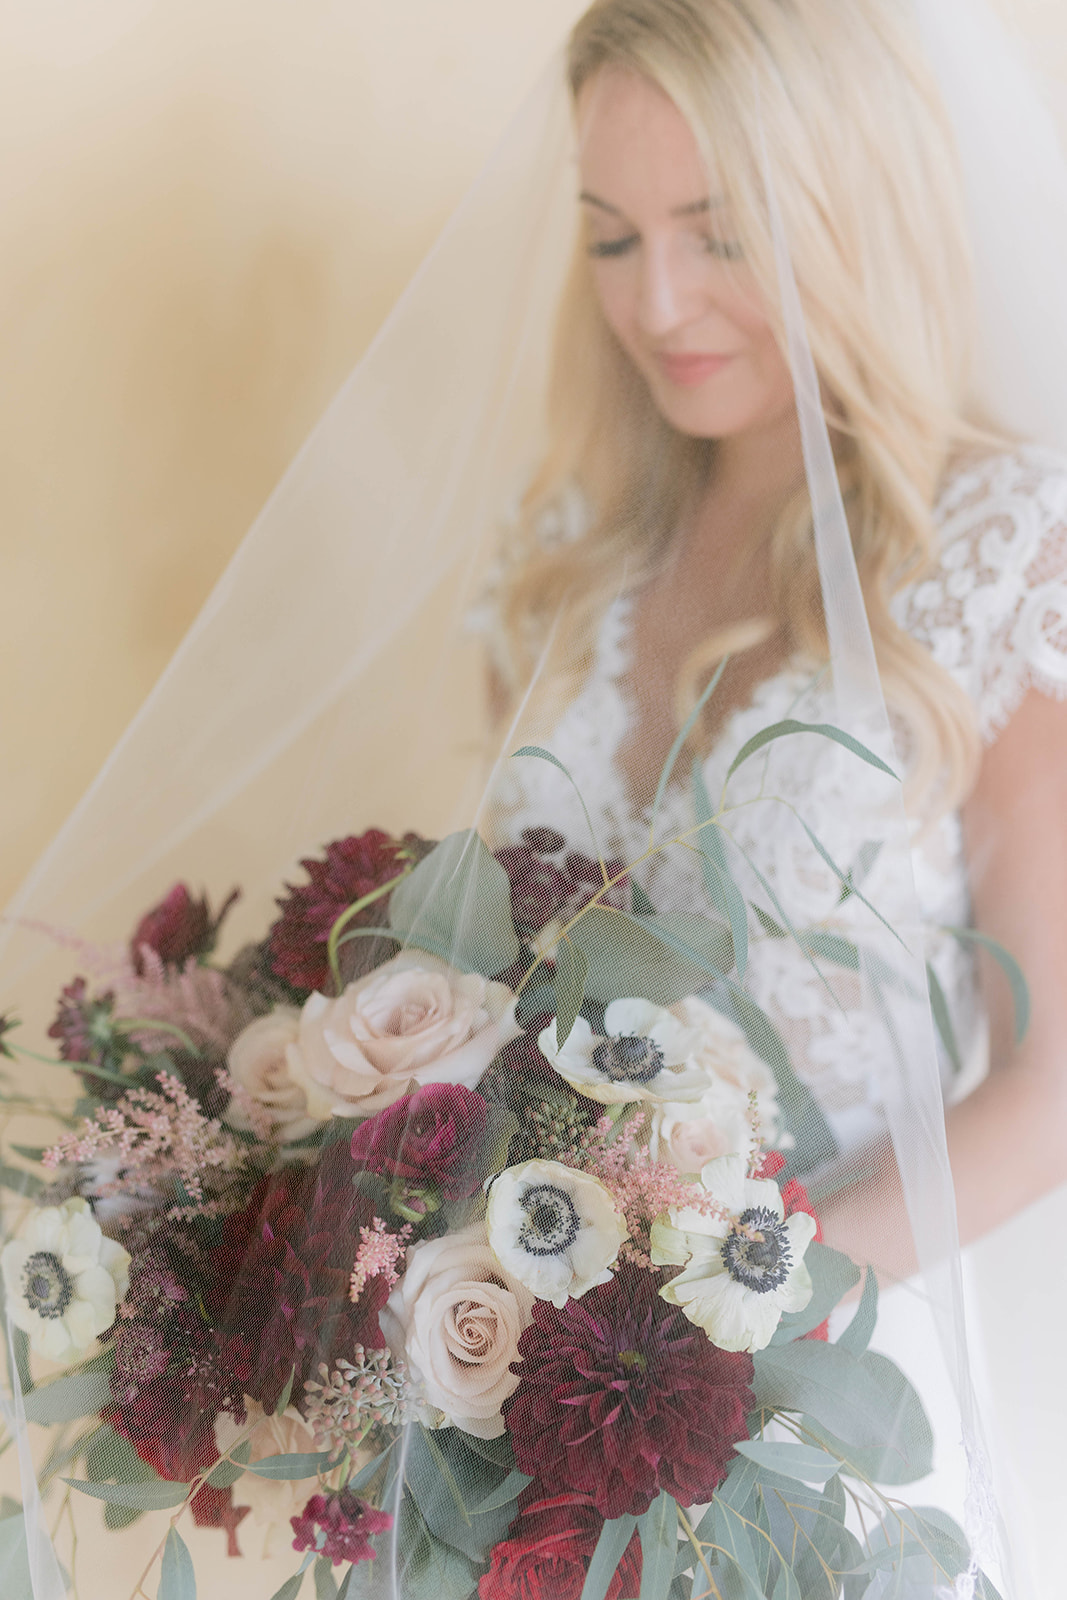 Bride with veil looking at the bouquet of burgundy, blush and ivory